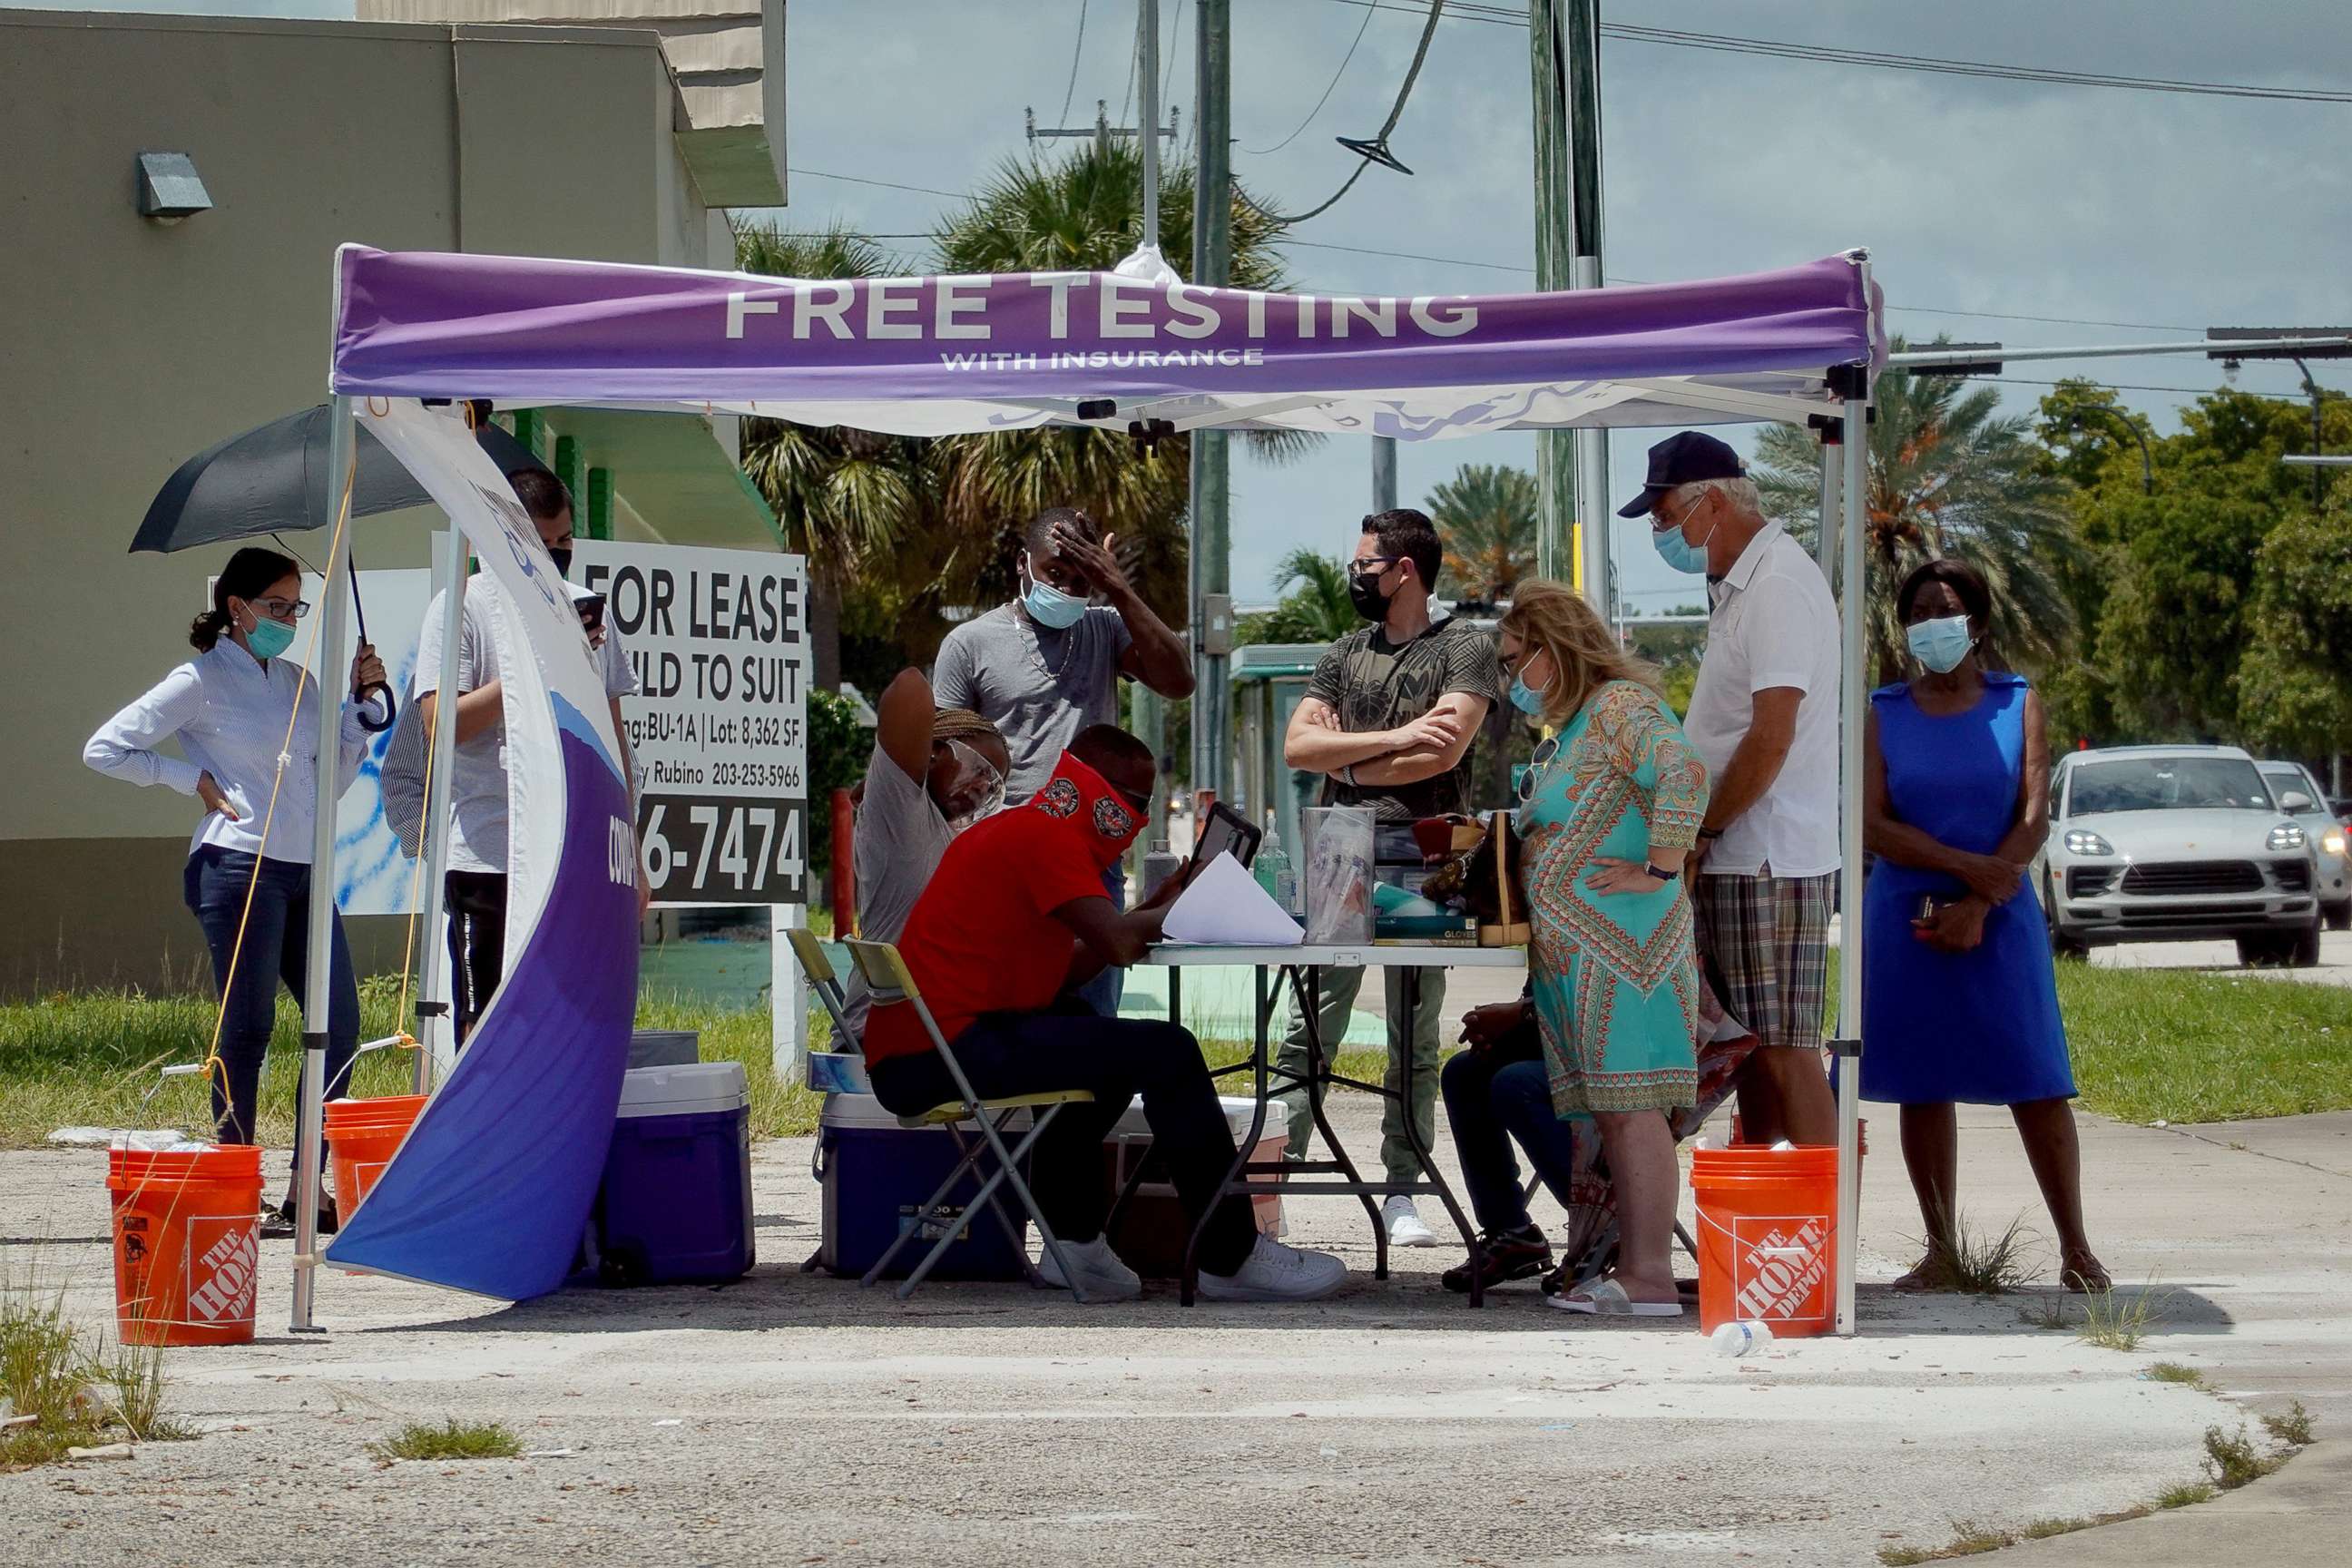 PHOTO: People wait to receive a COVID-19 test at a pop-up testing location on July 26, 2021 in Miami, Fla.